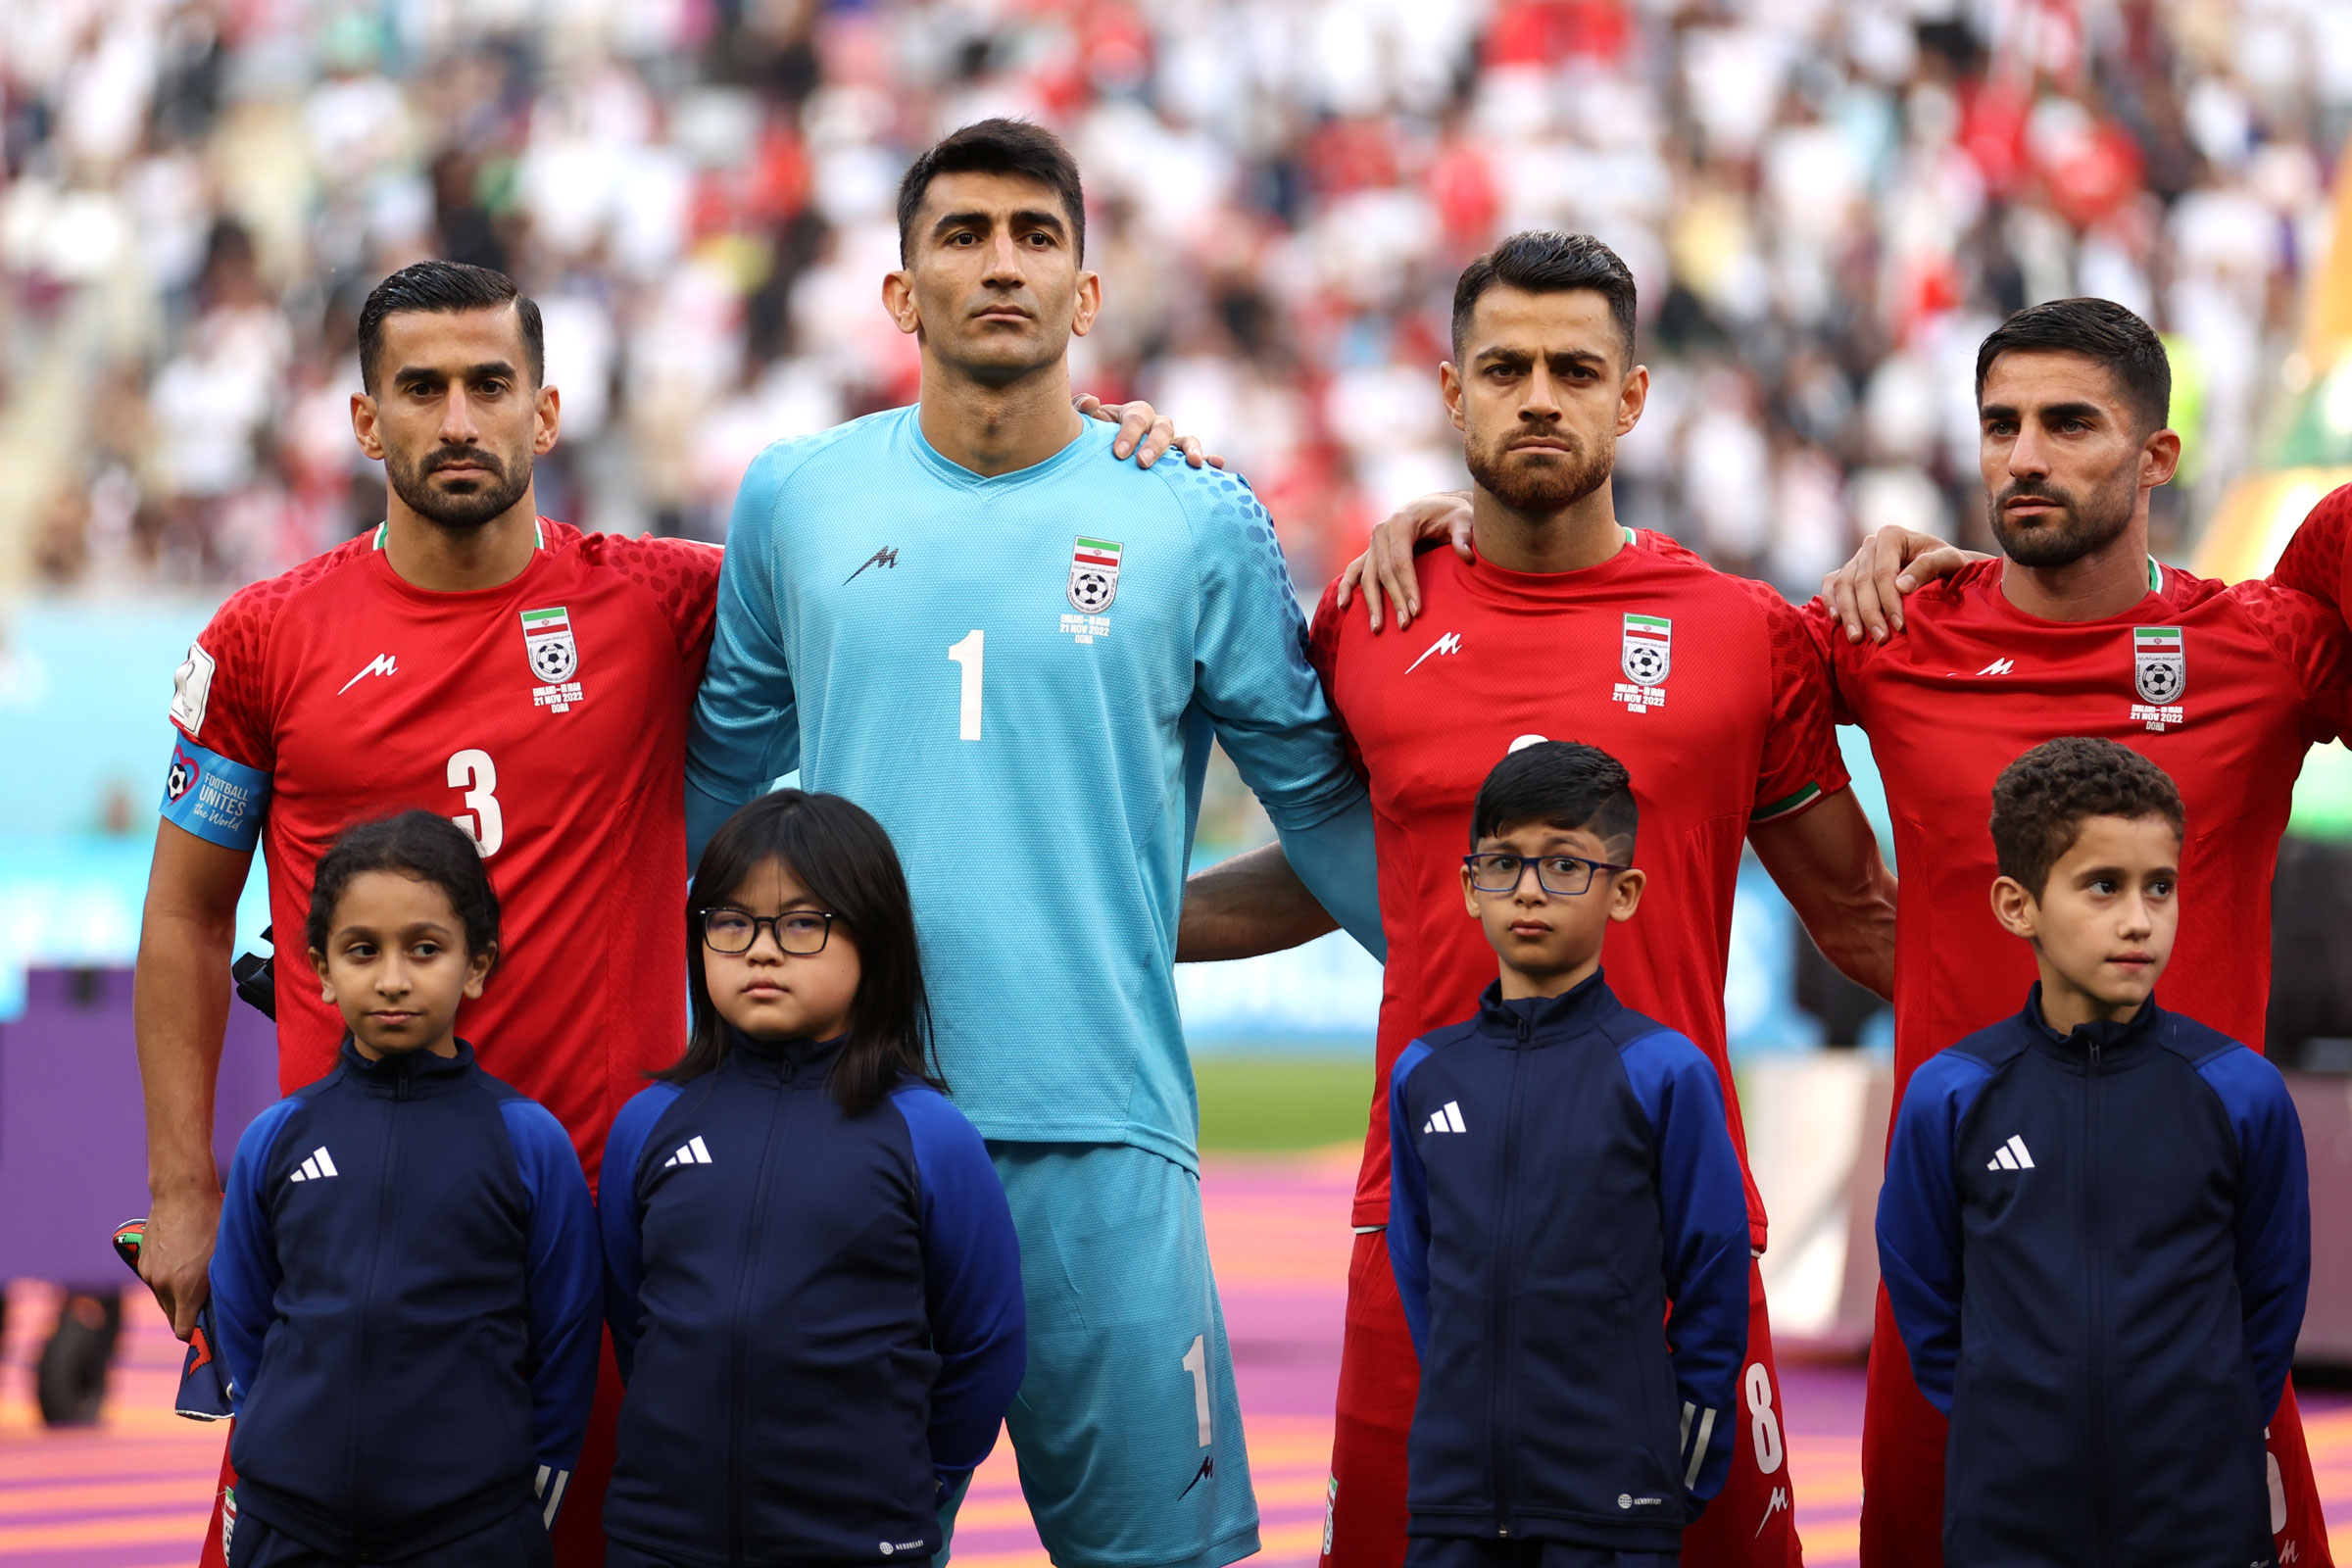 Iranian players line up for the national anthem prior to the match between England and Iran on Nov. 21, 2022 in Doha, Qatar. (Julian Finney—Getty Images)